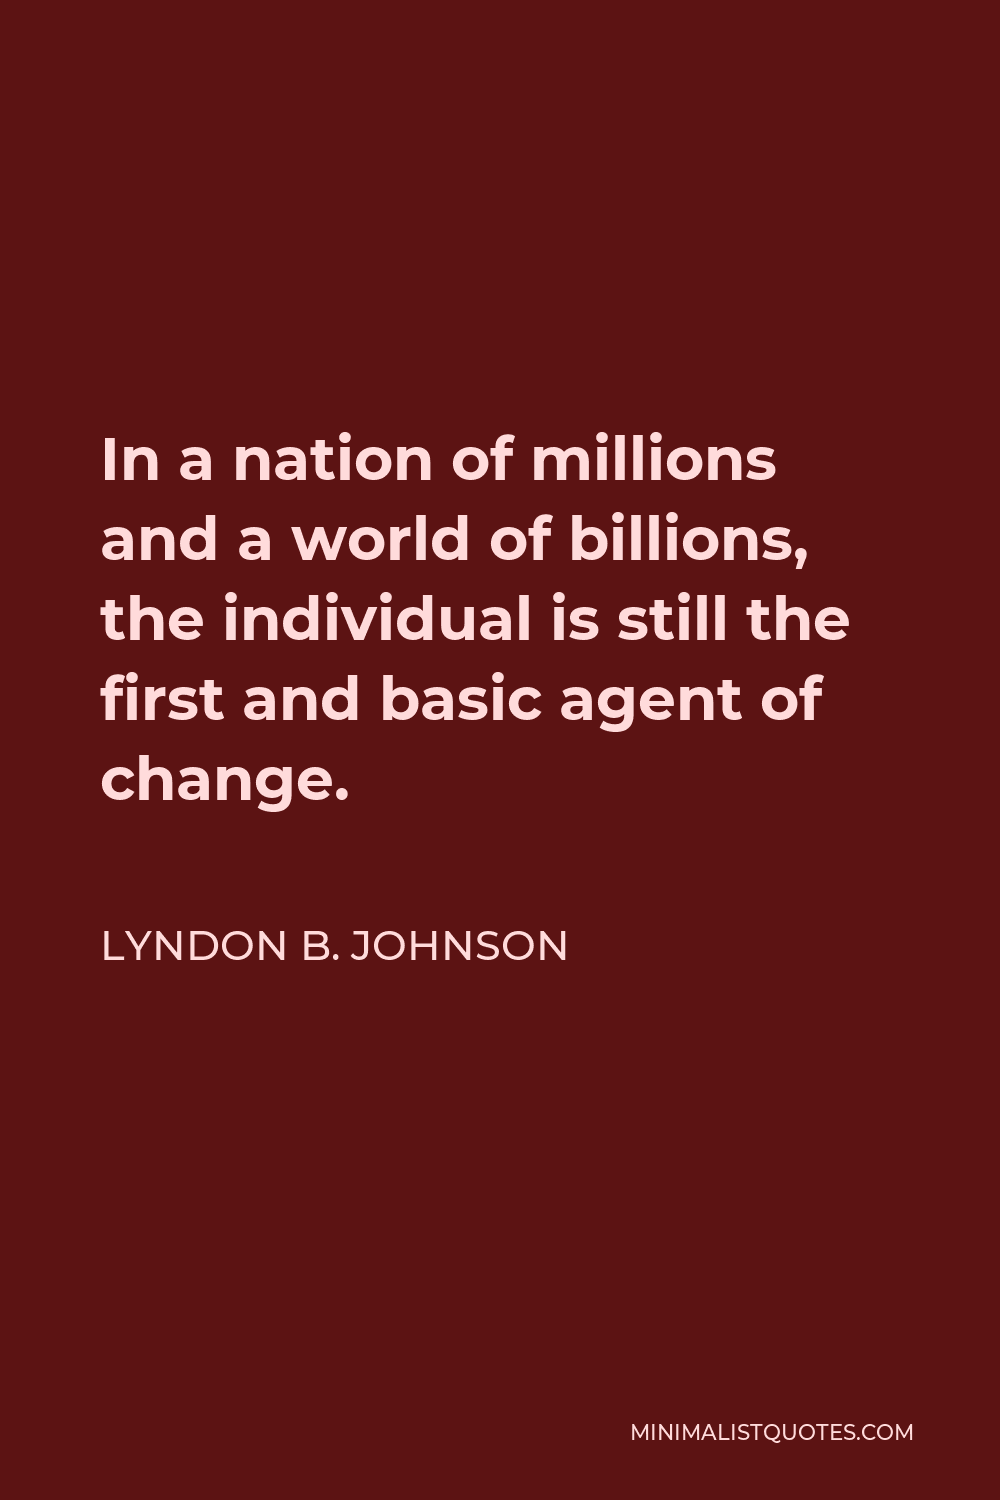 Lyndon B. Johnson Quote - In a nation of millions and a world of billions, the individual is still the first and basic agent of change.